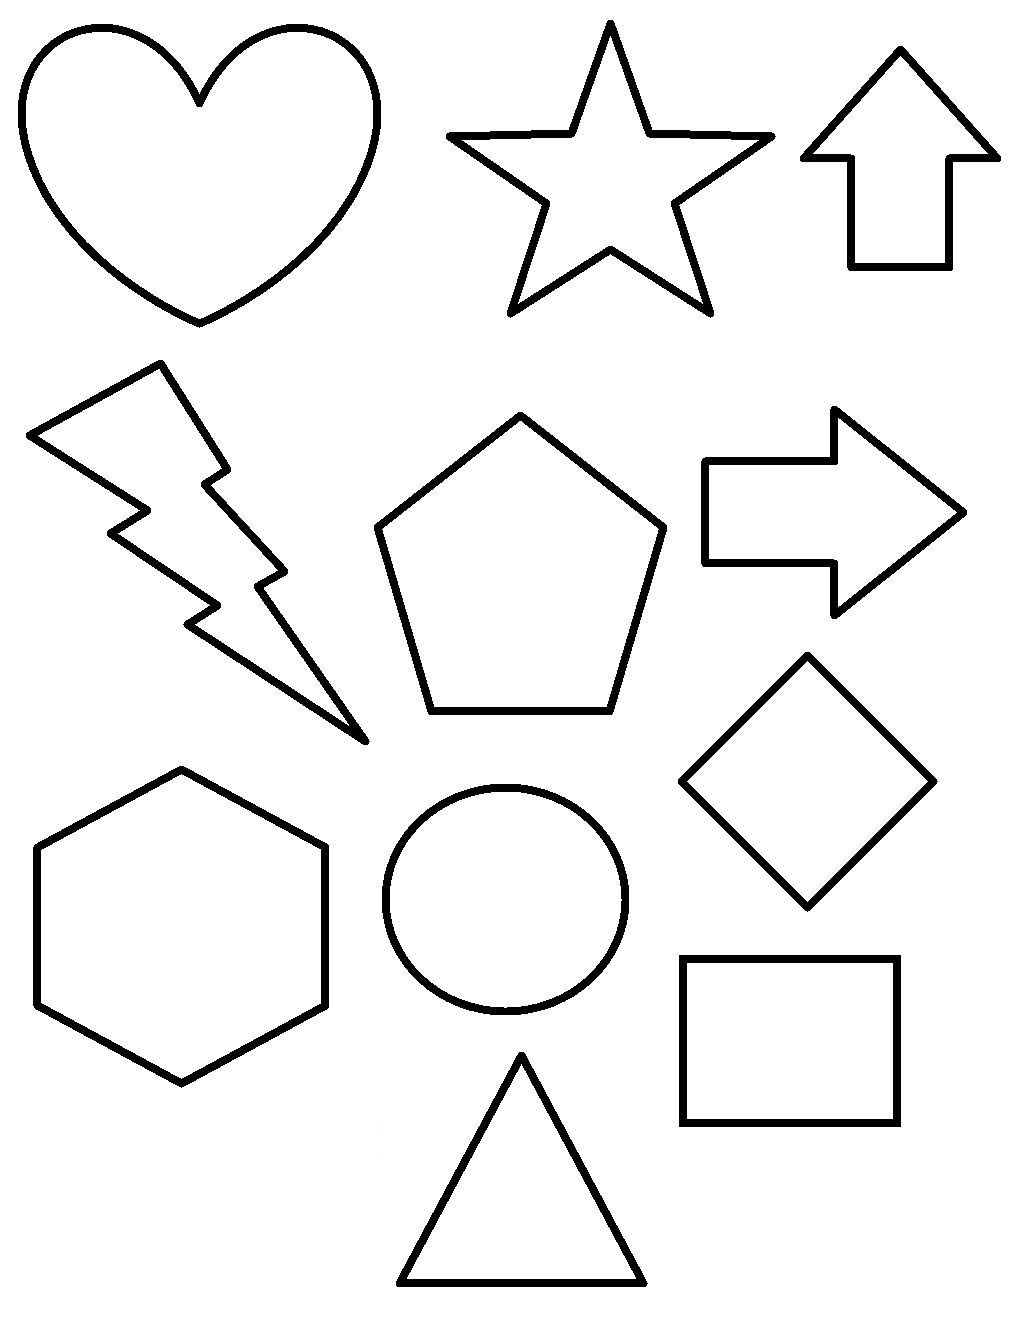 Free Printable Shapes Coloring Pages For Kids - Free Printable Shapes